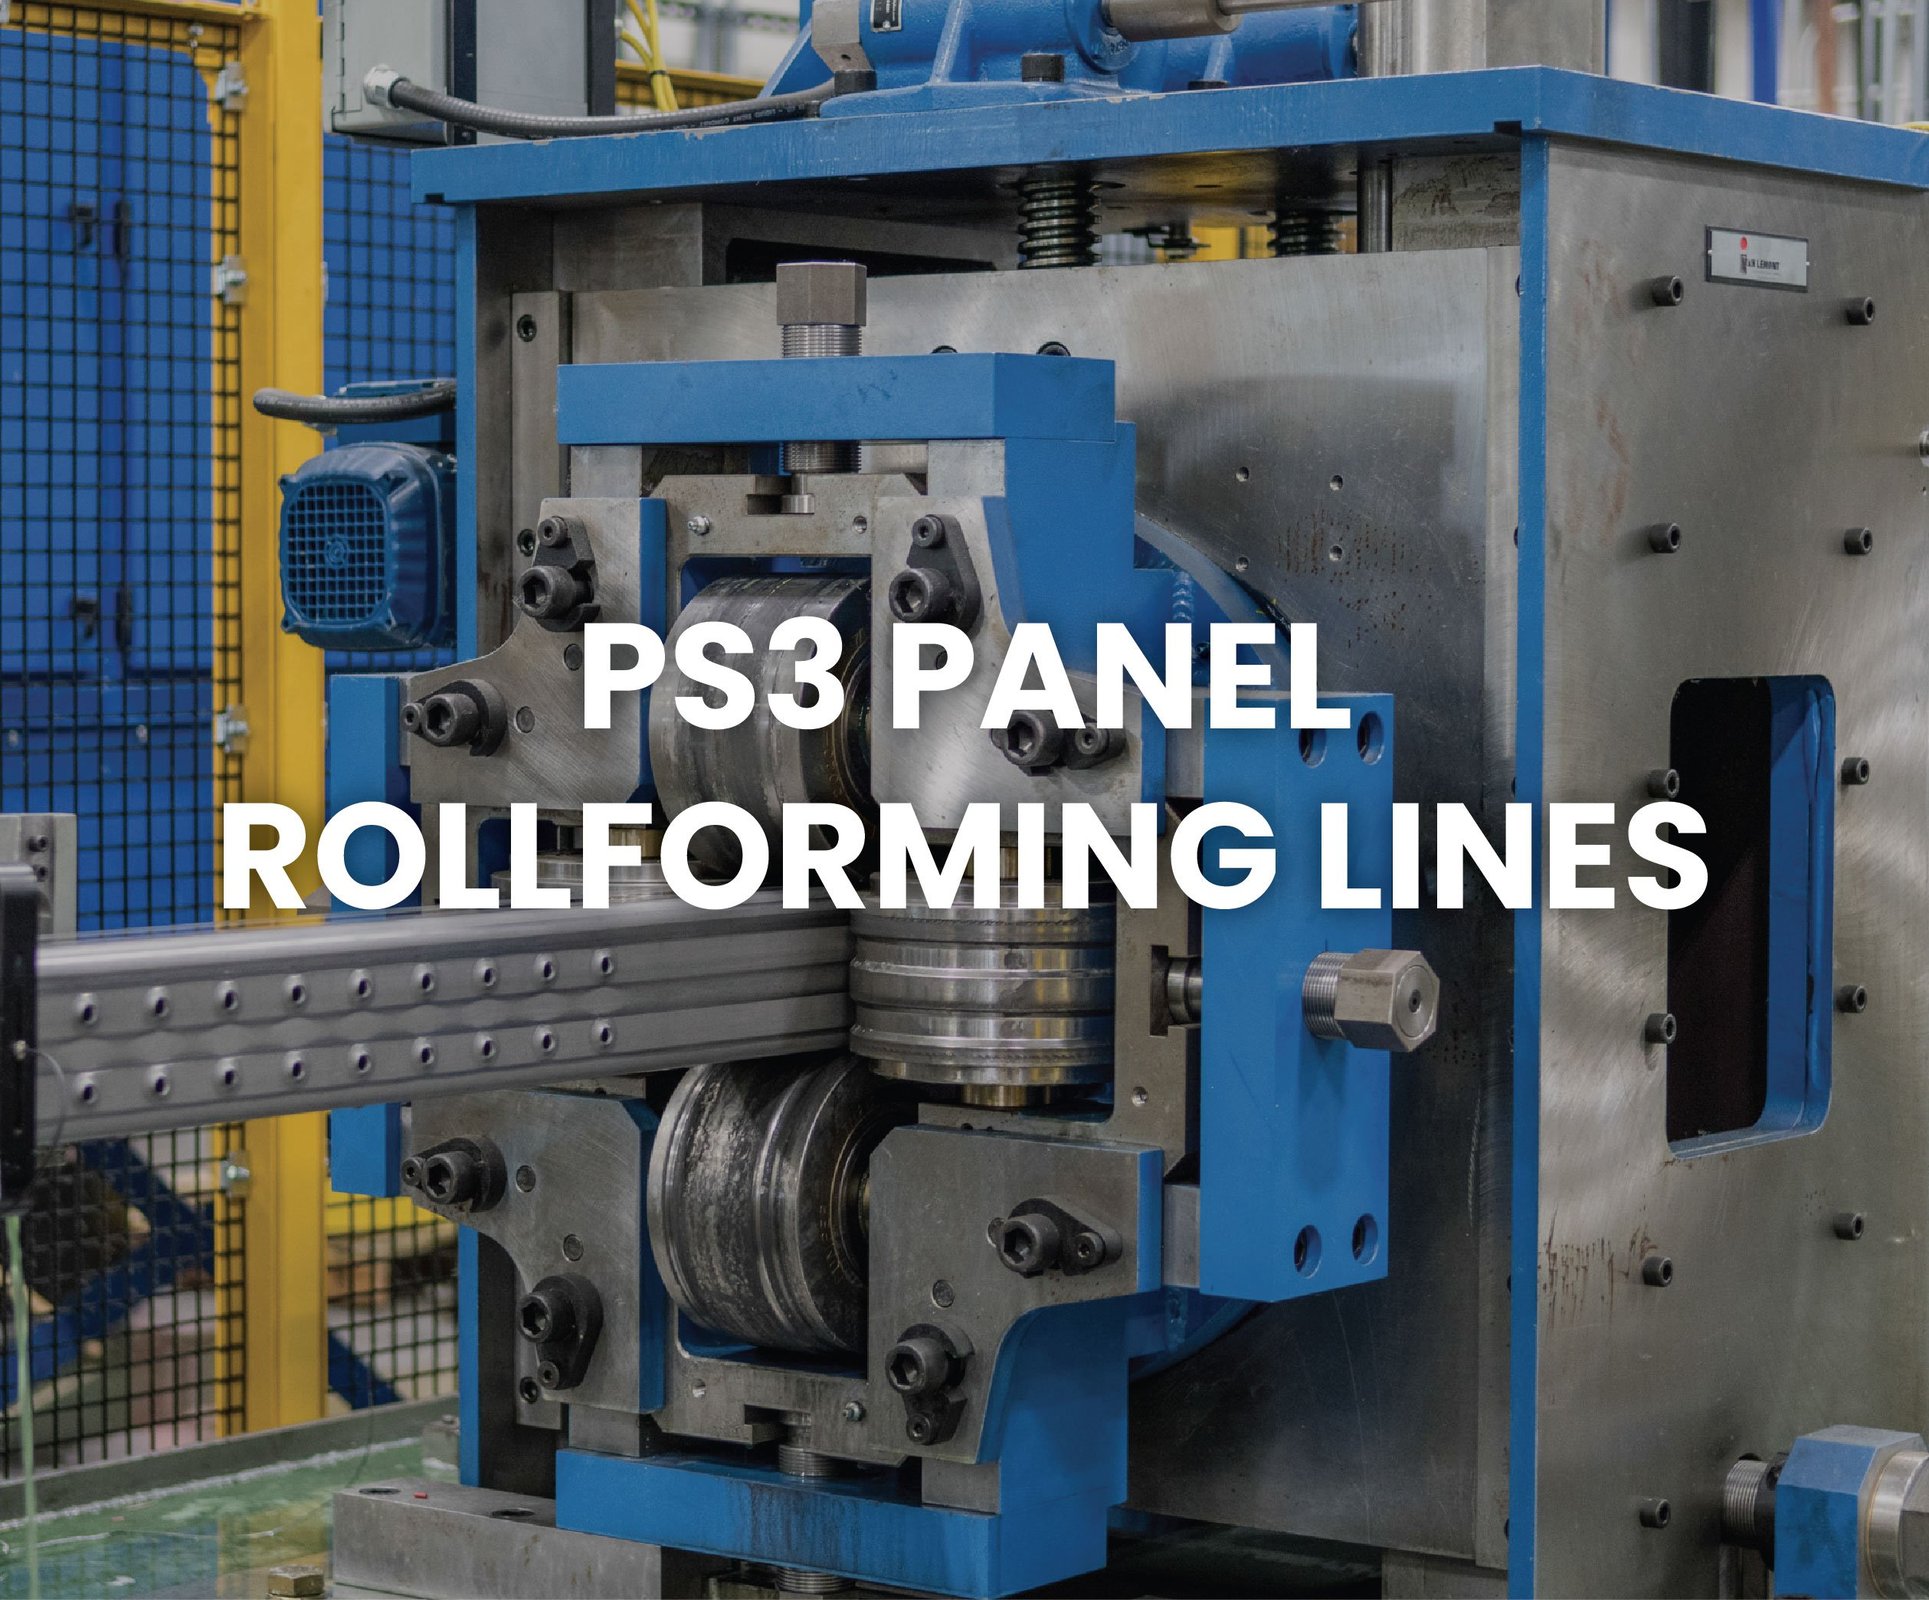 PS3 Panel RollForming Lines